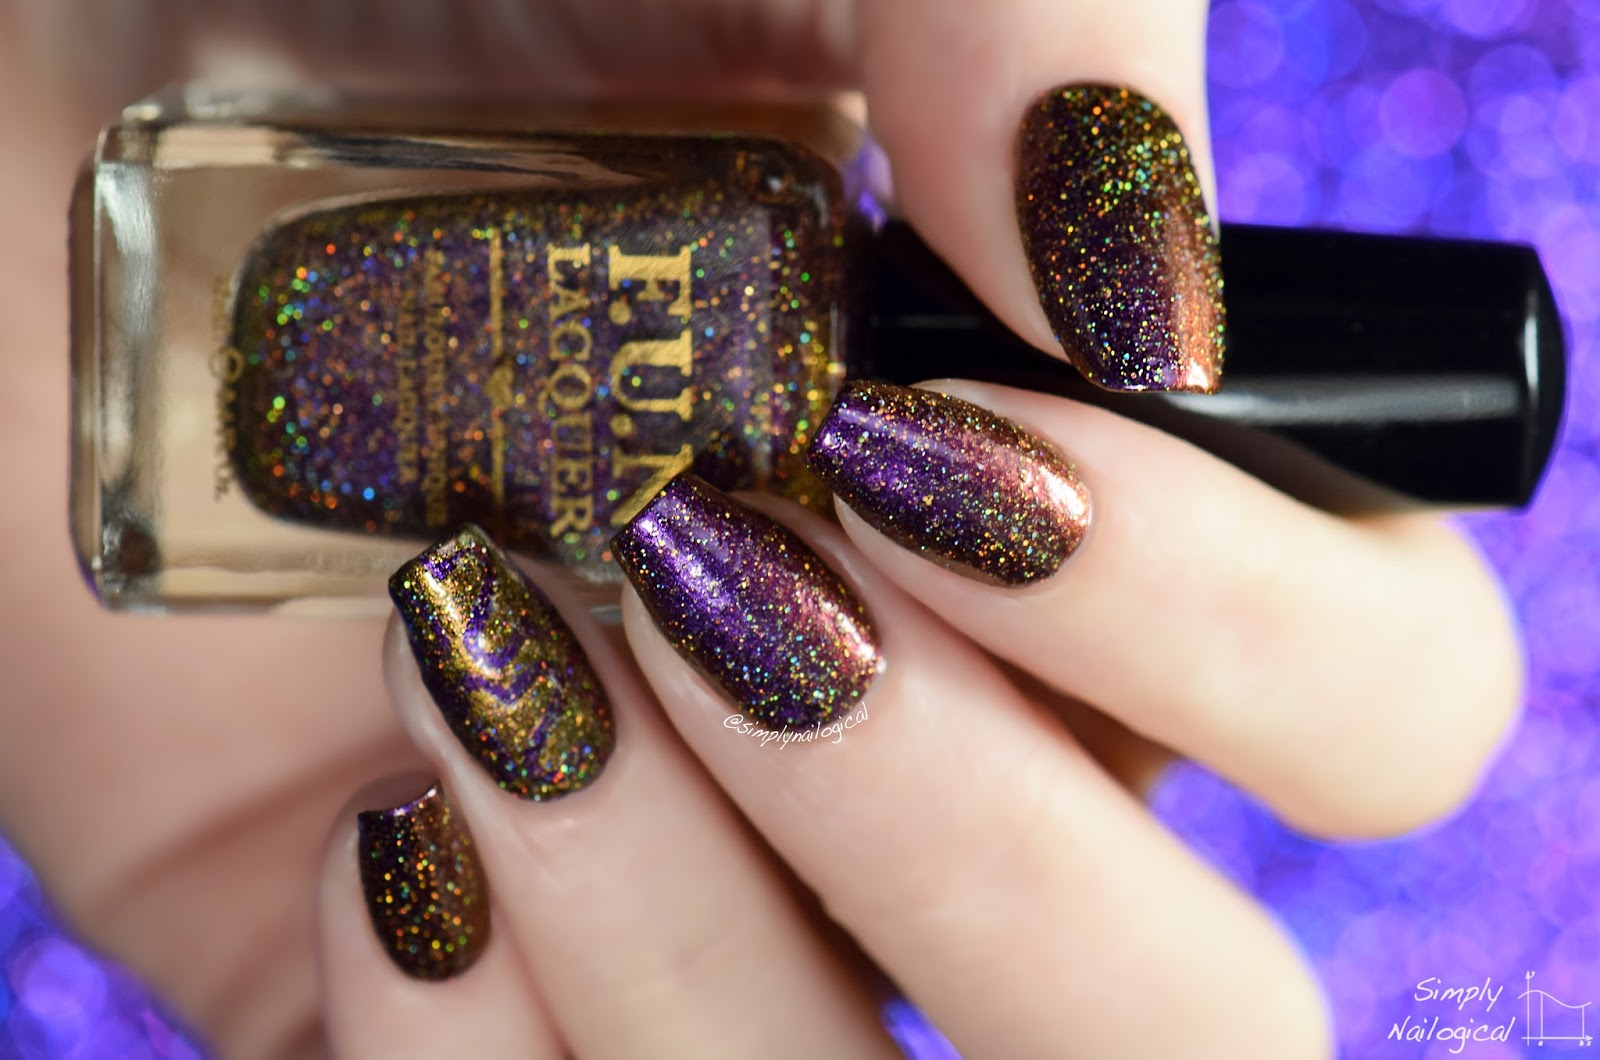 FUN Lacquer 2015 Love collection - Storge (H)